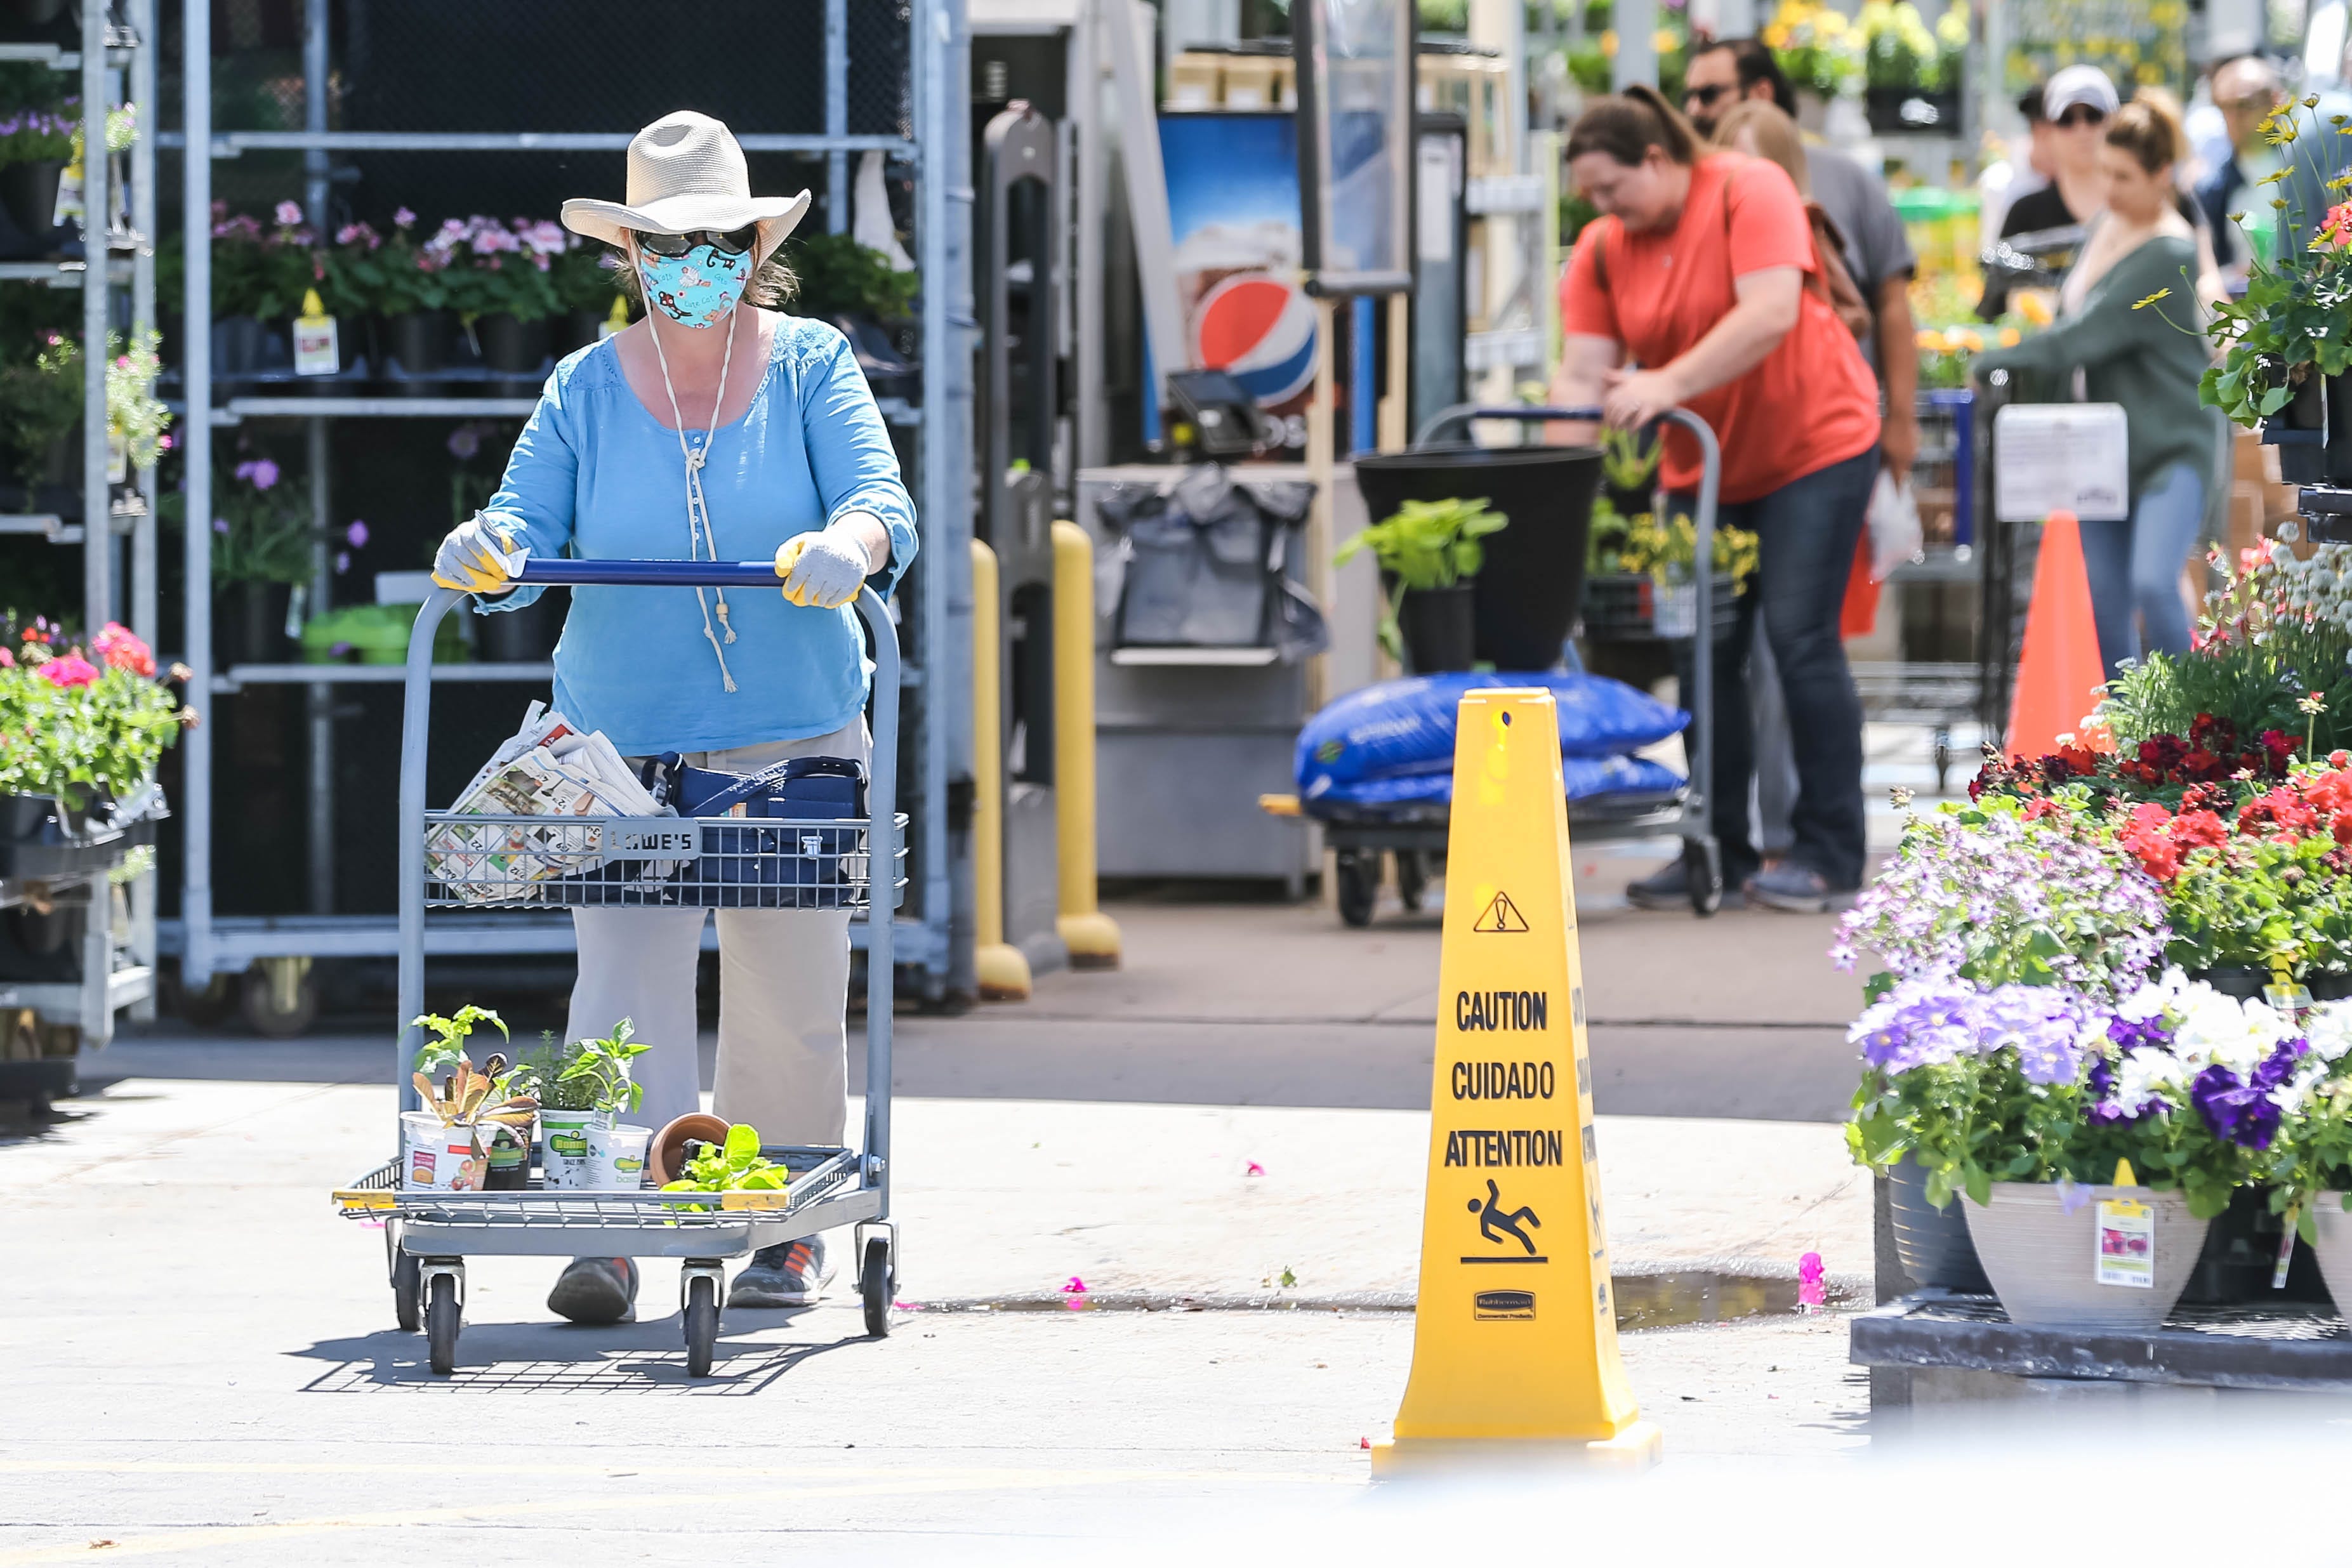 Shoppers wear masks and gloves while at Lowe's in Las Cruces on Saturday, April 4, 2020.